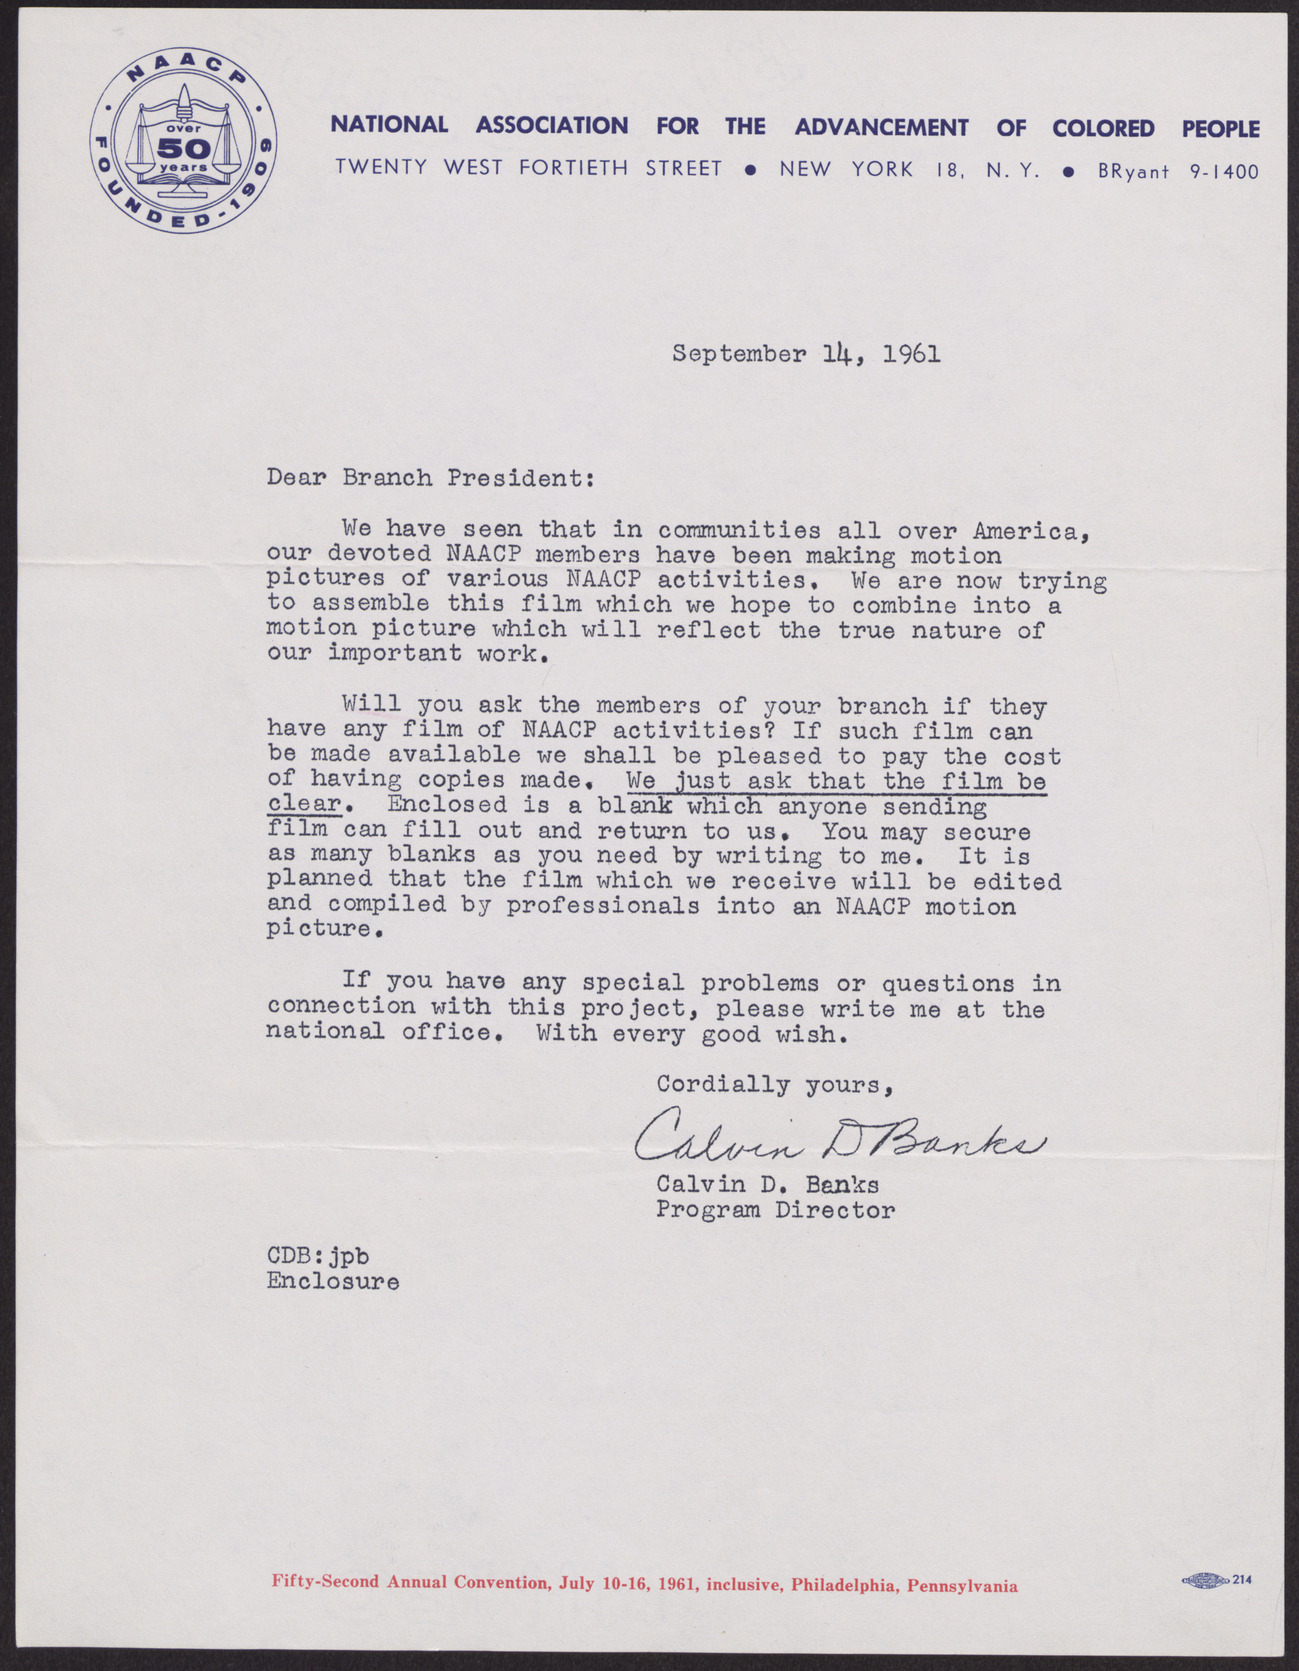 Letter to NAACP regional branch presidents from Calvin D. Banks, September 14, 1961